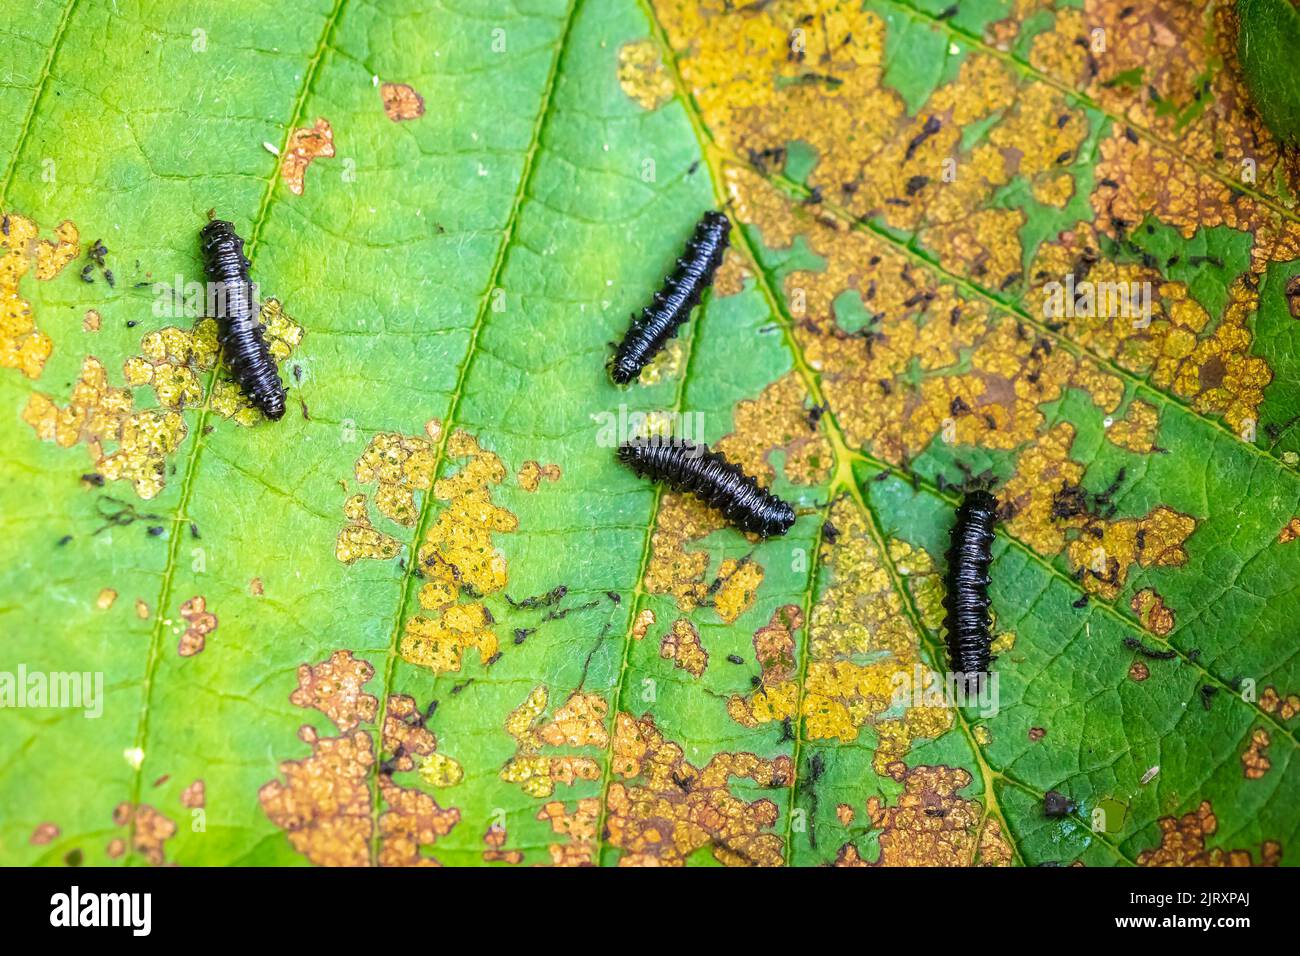 Closeup of a small alder leaf beetle, agelastica alni, caterpillar climbing up on green grass and reeds on a summer day. Stock Photo